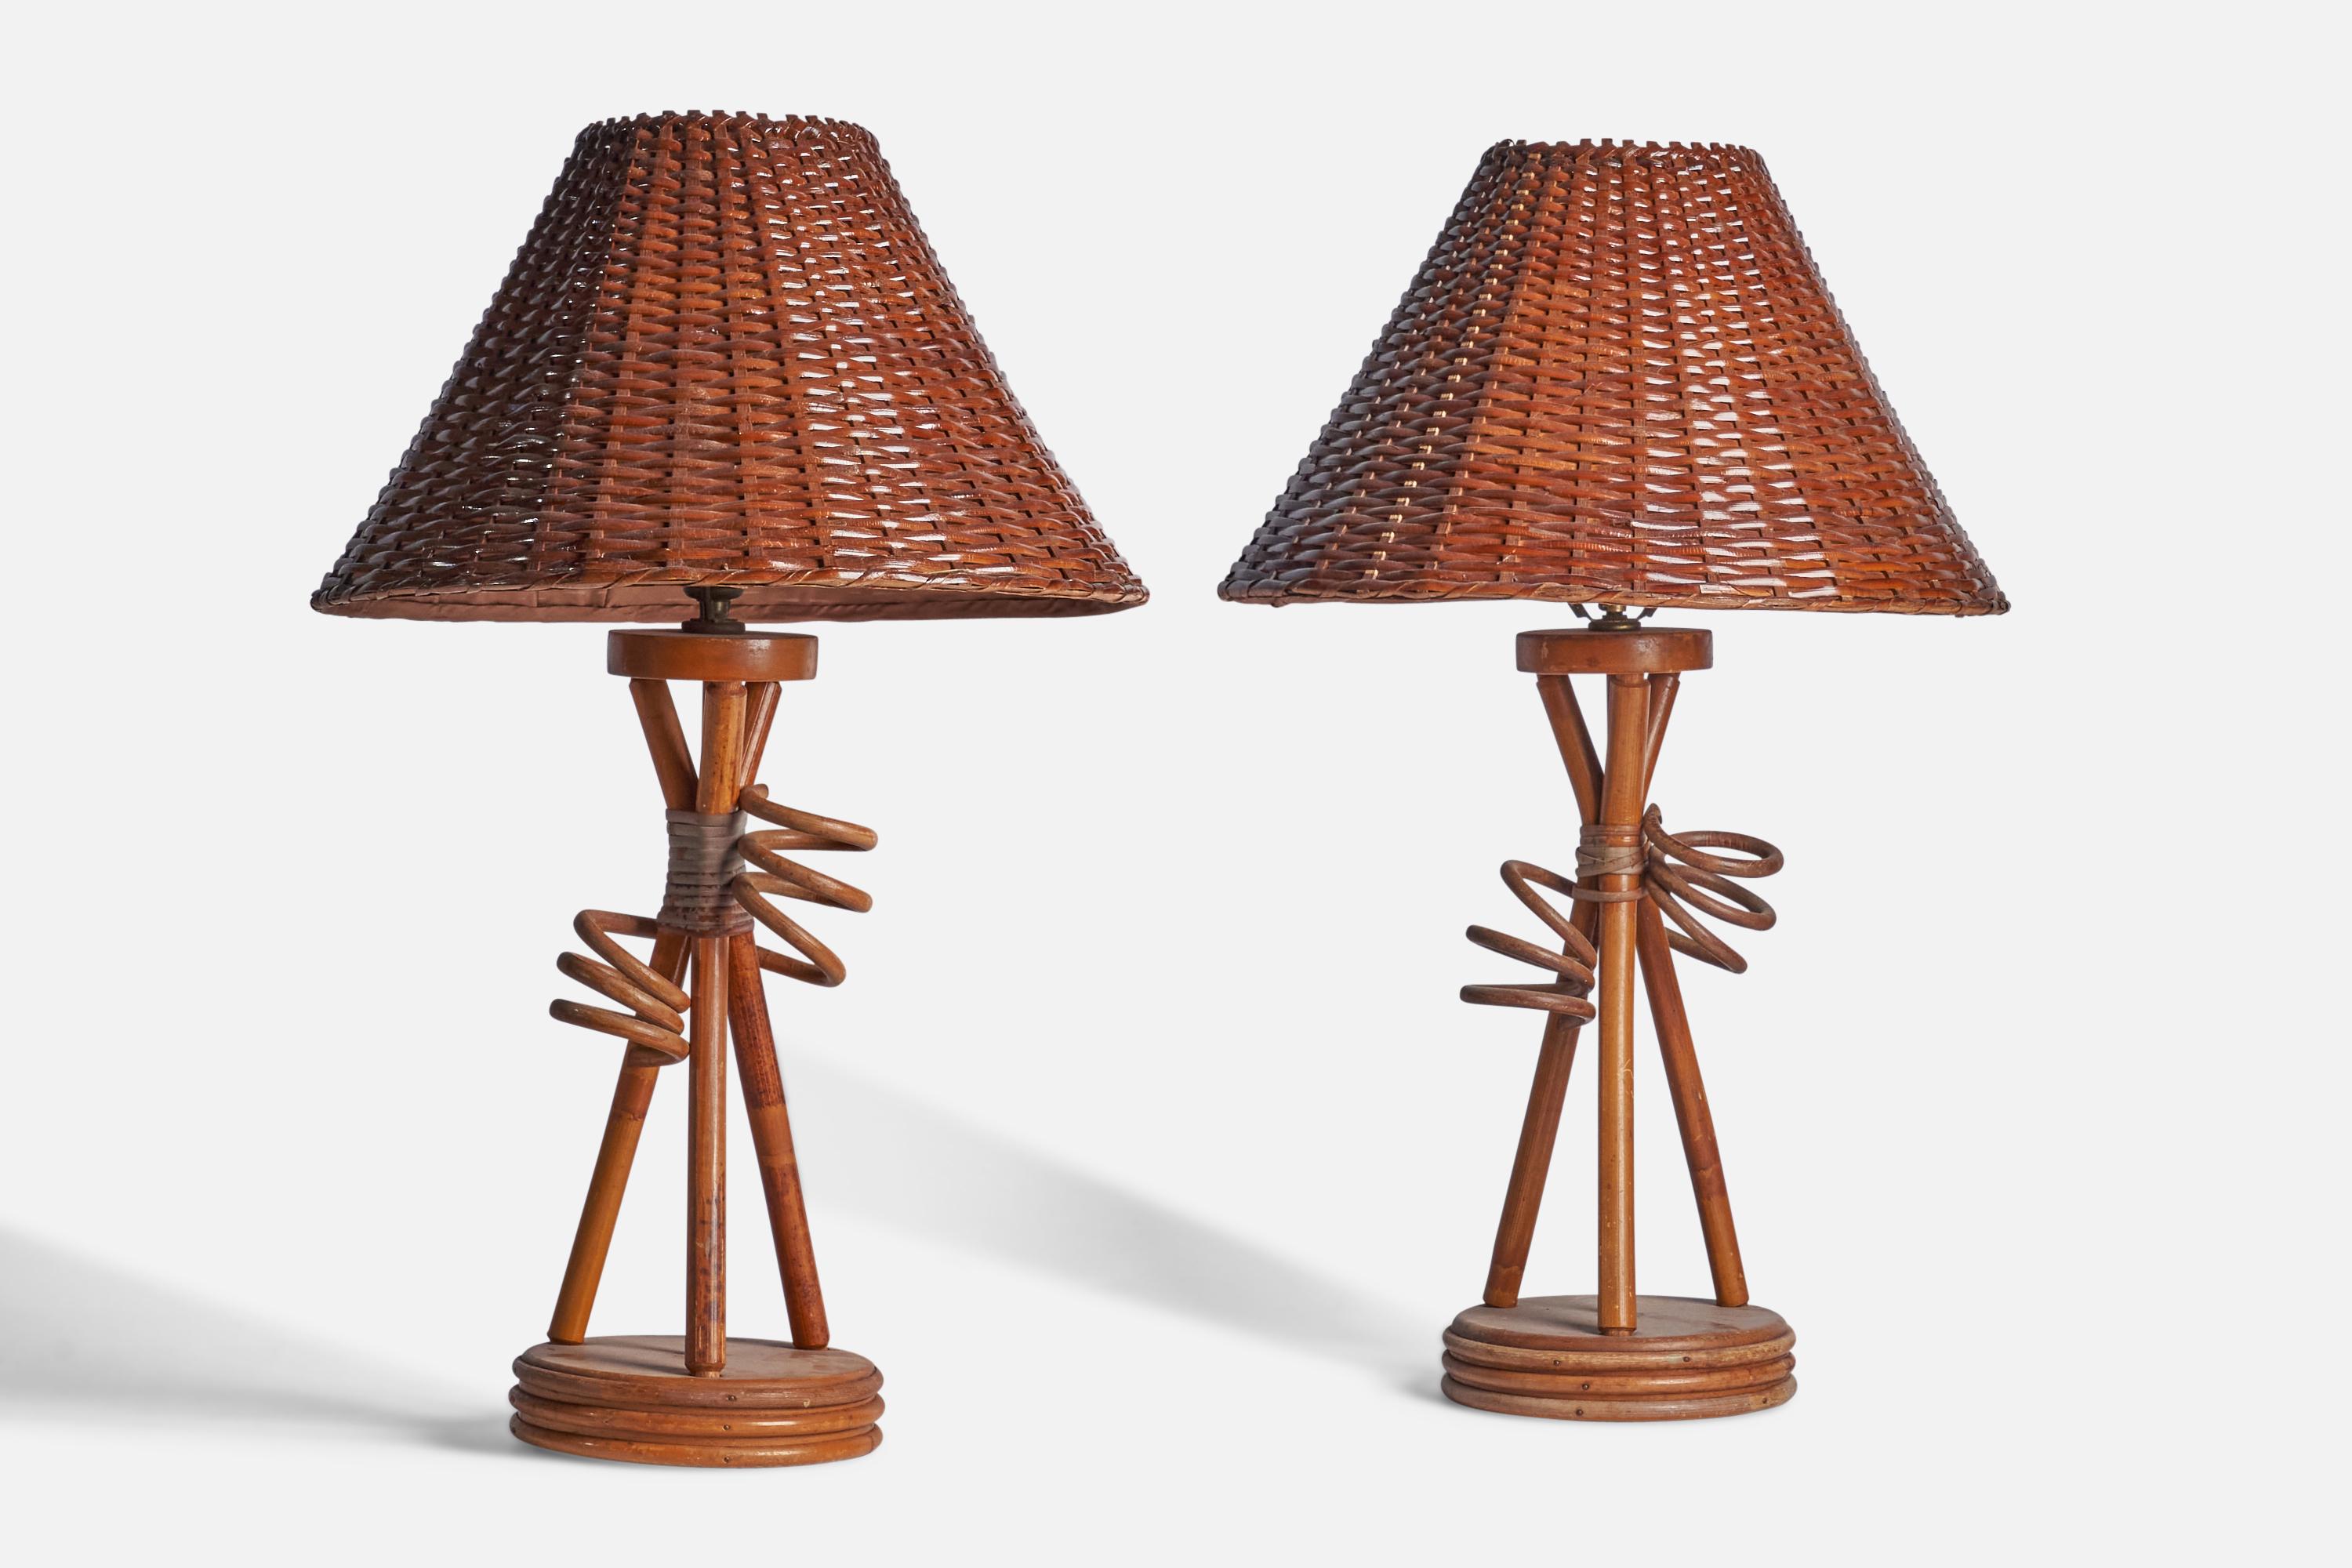 A pair of rattan and bamboo table lamps designed and produced in the US, 1950s.

Overall Dimensions (inches): 28